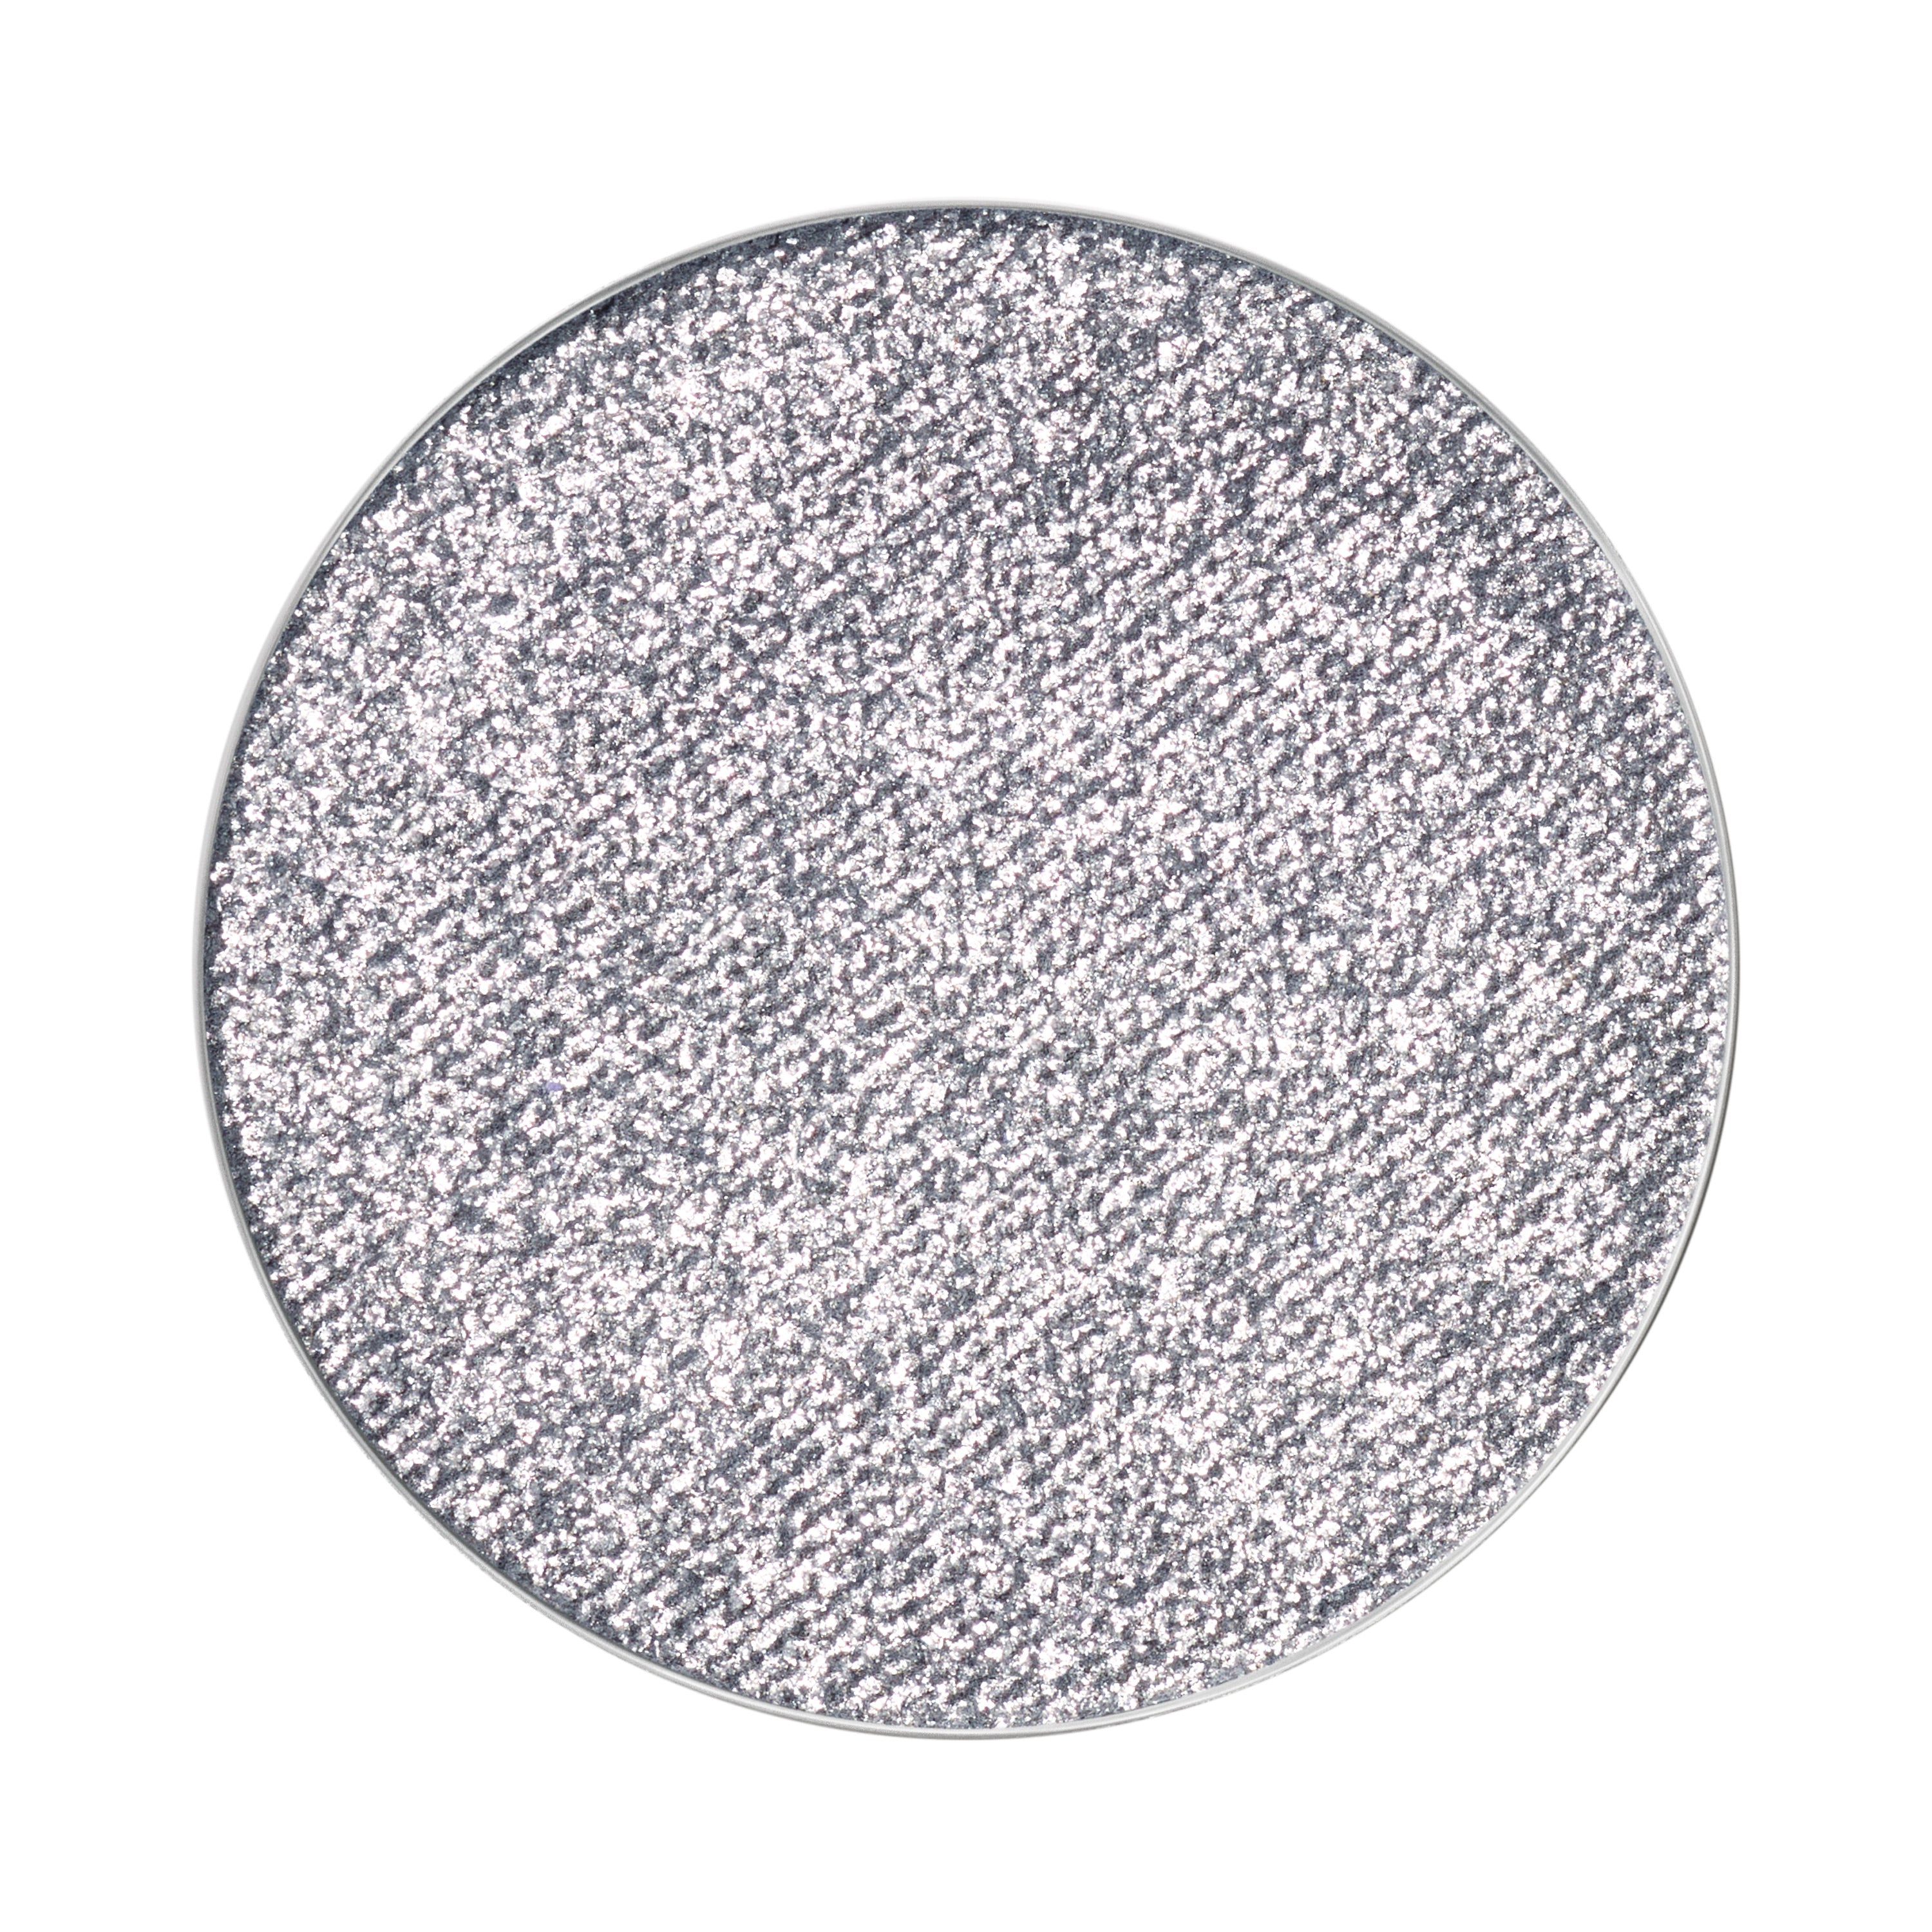 M·A·C Dazzleshadow Extreme (Pro Palette Refill Pan)